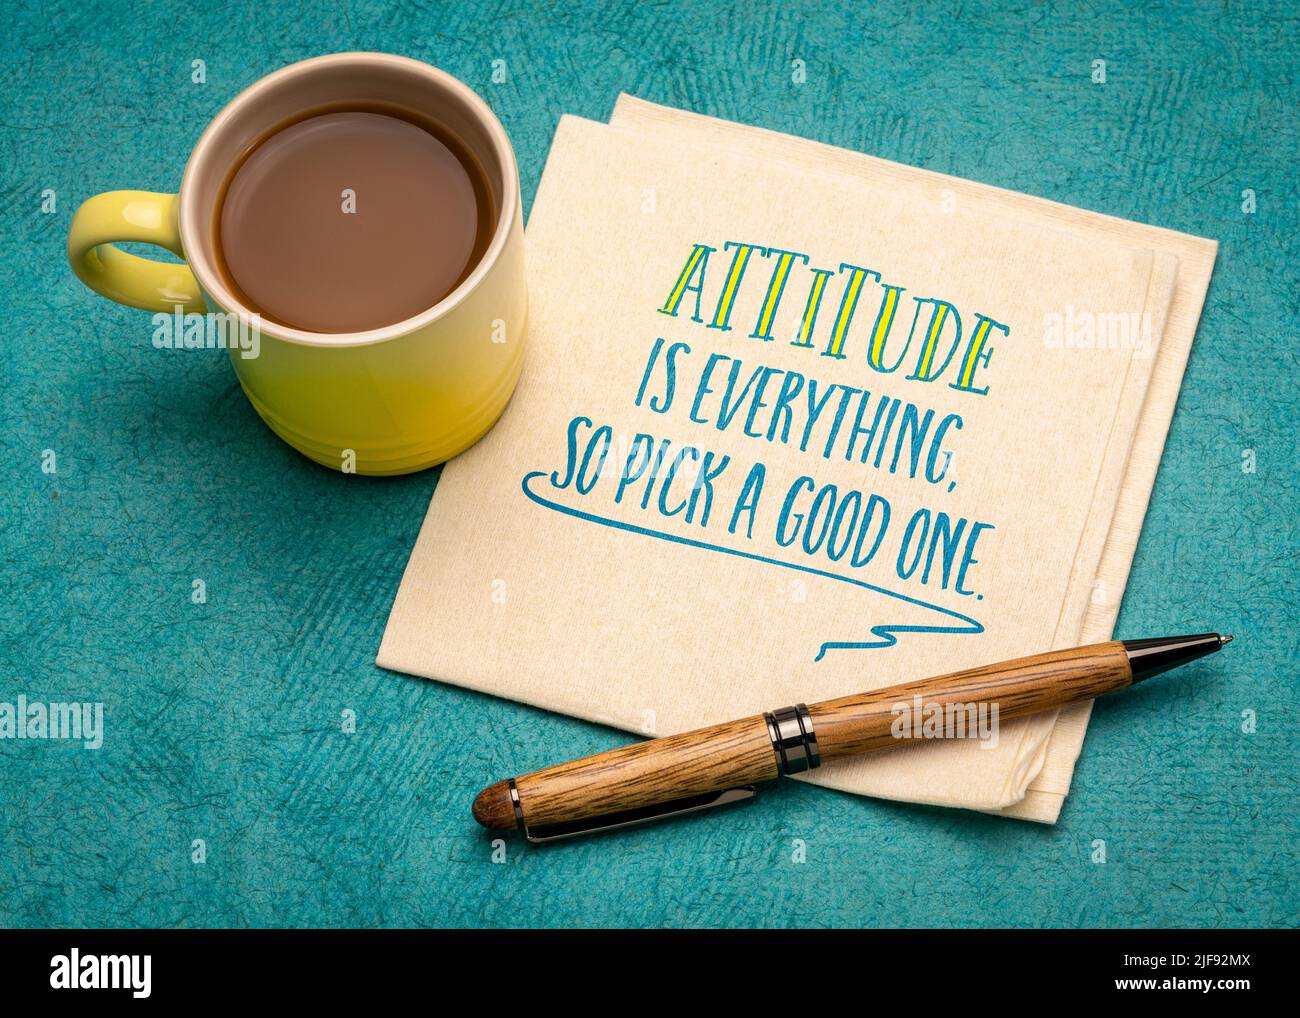 attitude is everything - motivational slogan on a napkin with a cup of coffee, personal development concept Stock Photo